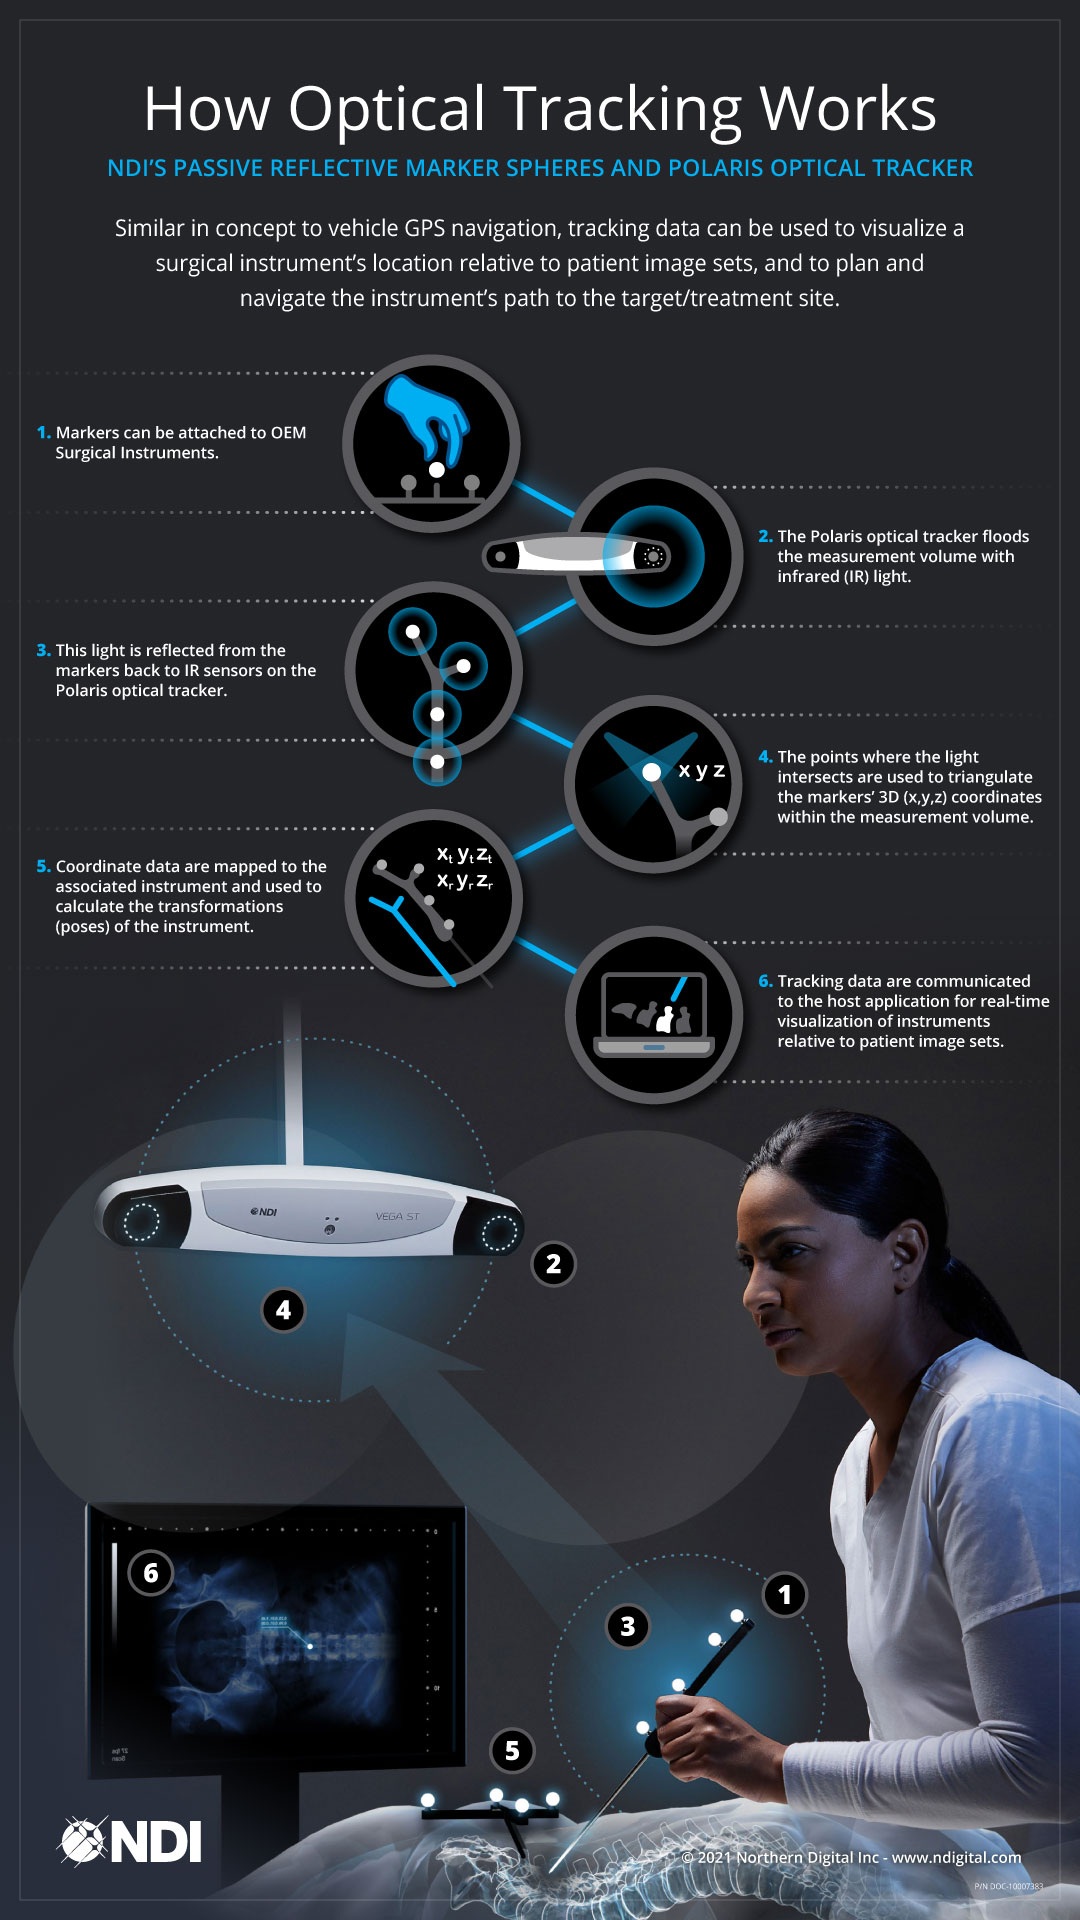 DOC 10007383 Rev001 How Optical Works Infographic